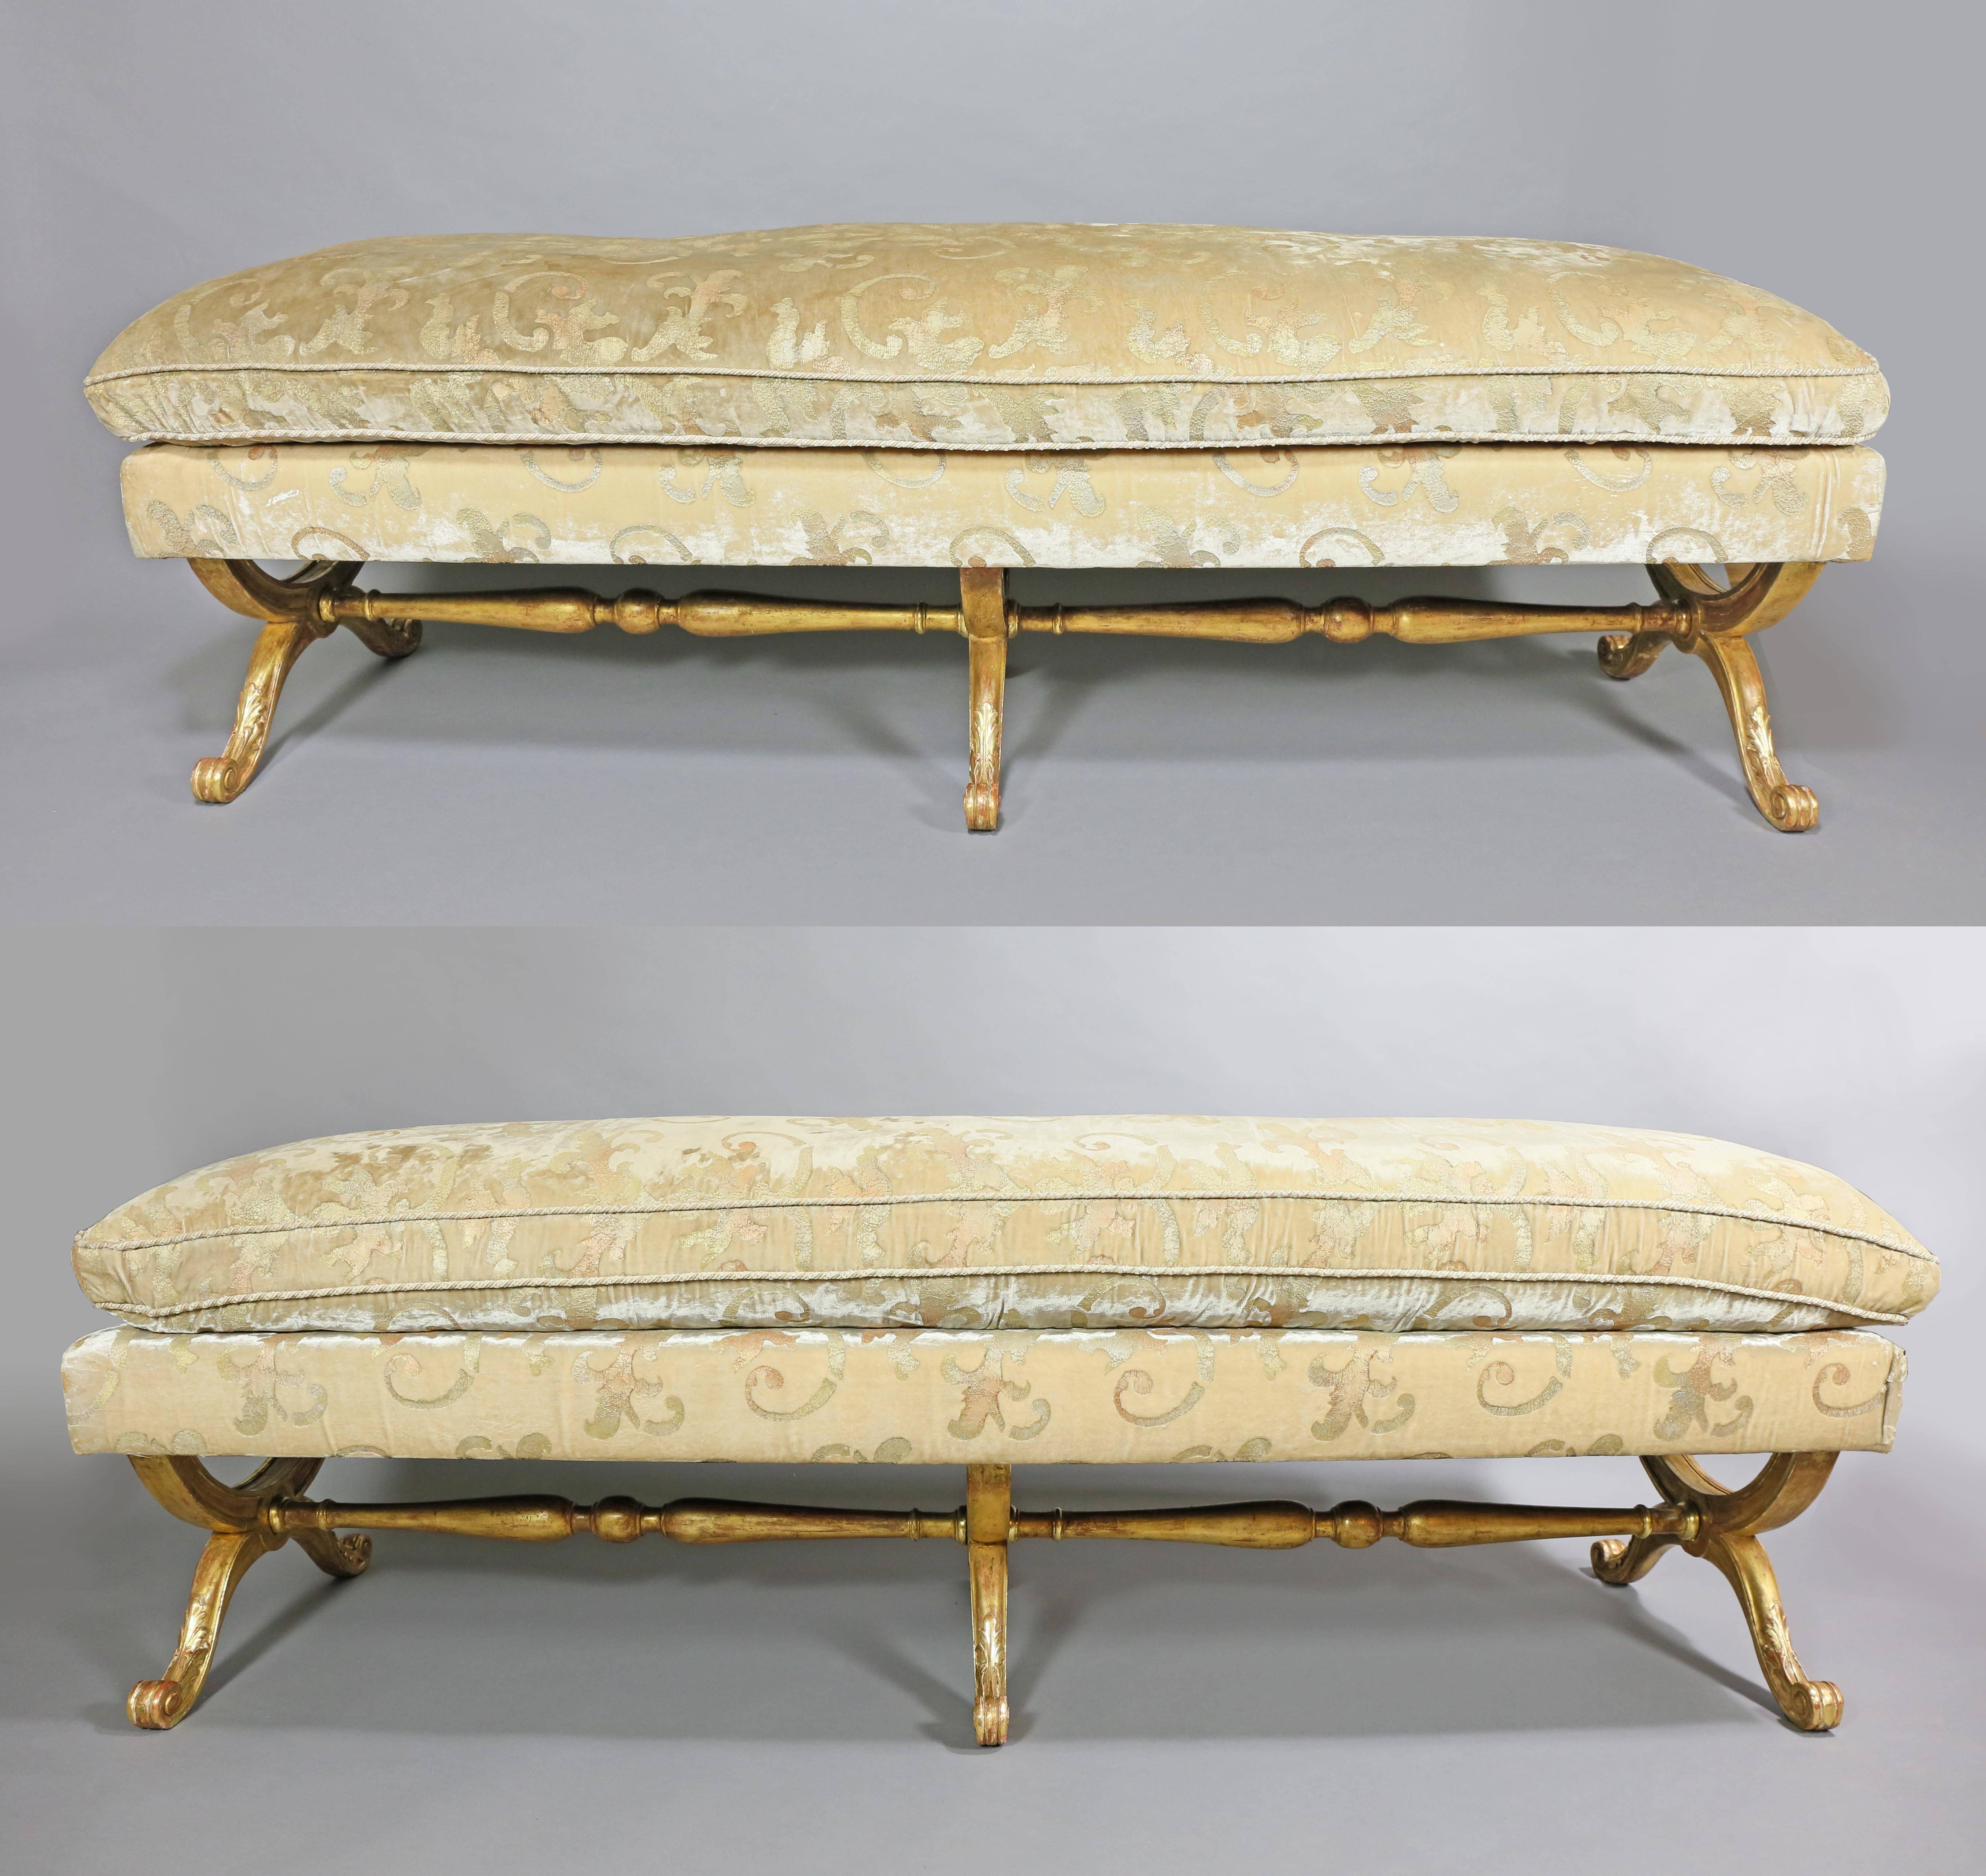 Pair of Louis XVI Style Giltwood Benches with Mirella Spinella Upholstery 1